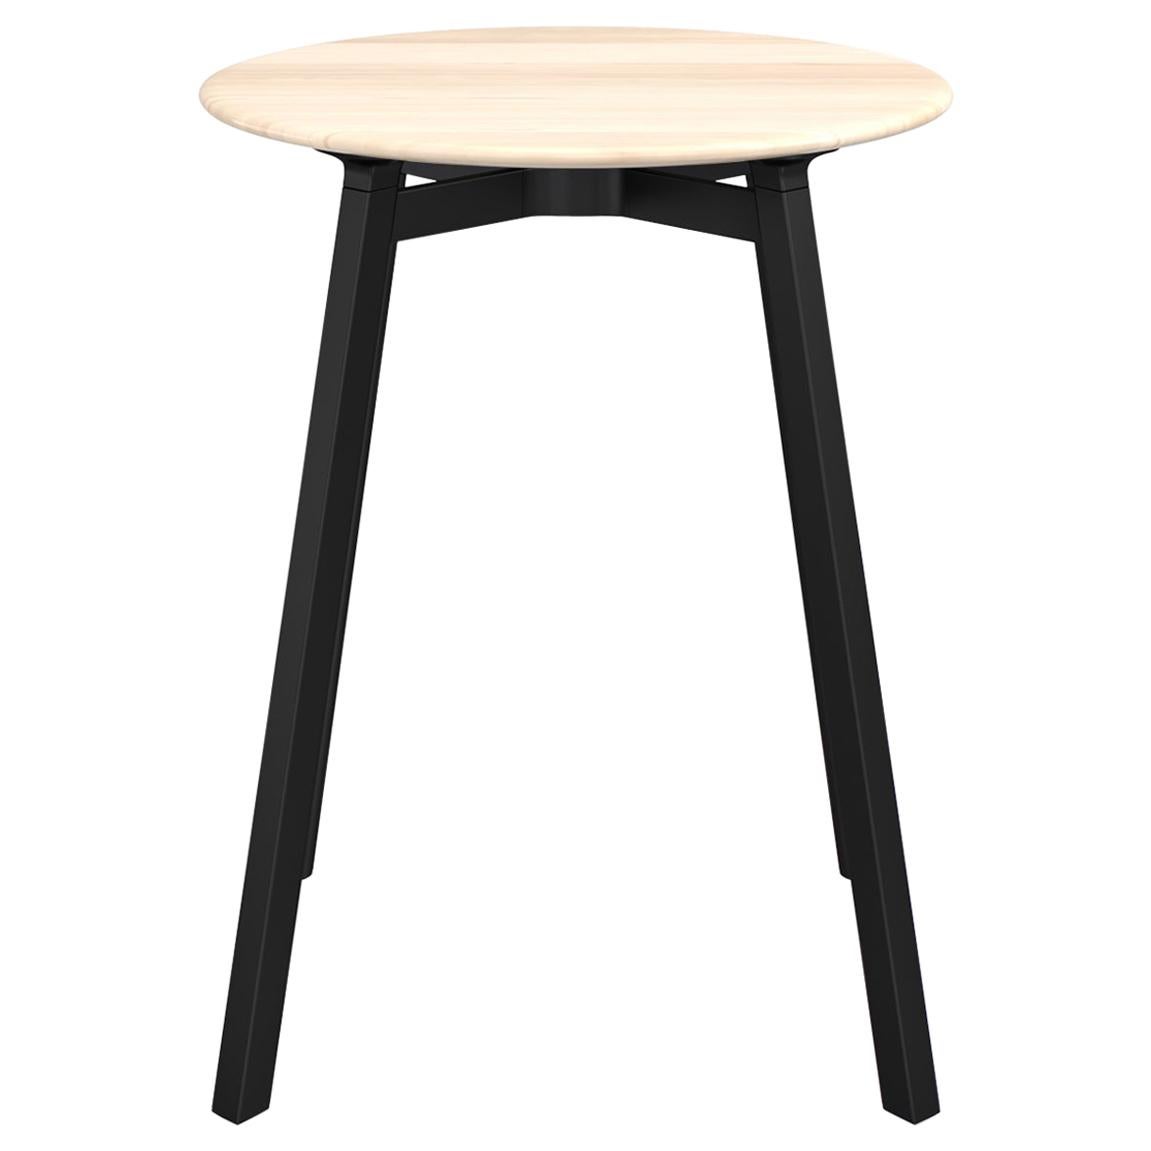 Emeco Su Small Round Cafe Table with Black Anodized Frame & Wood Top by Nendo